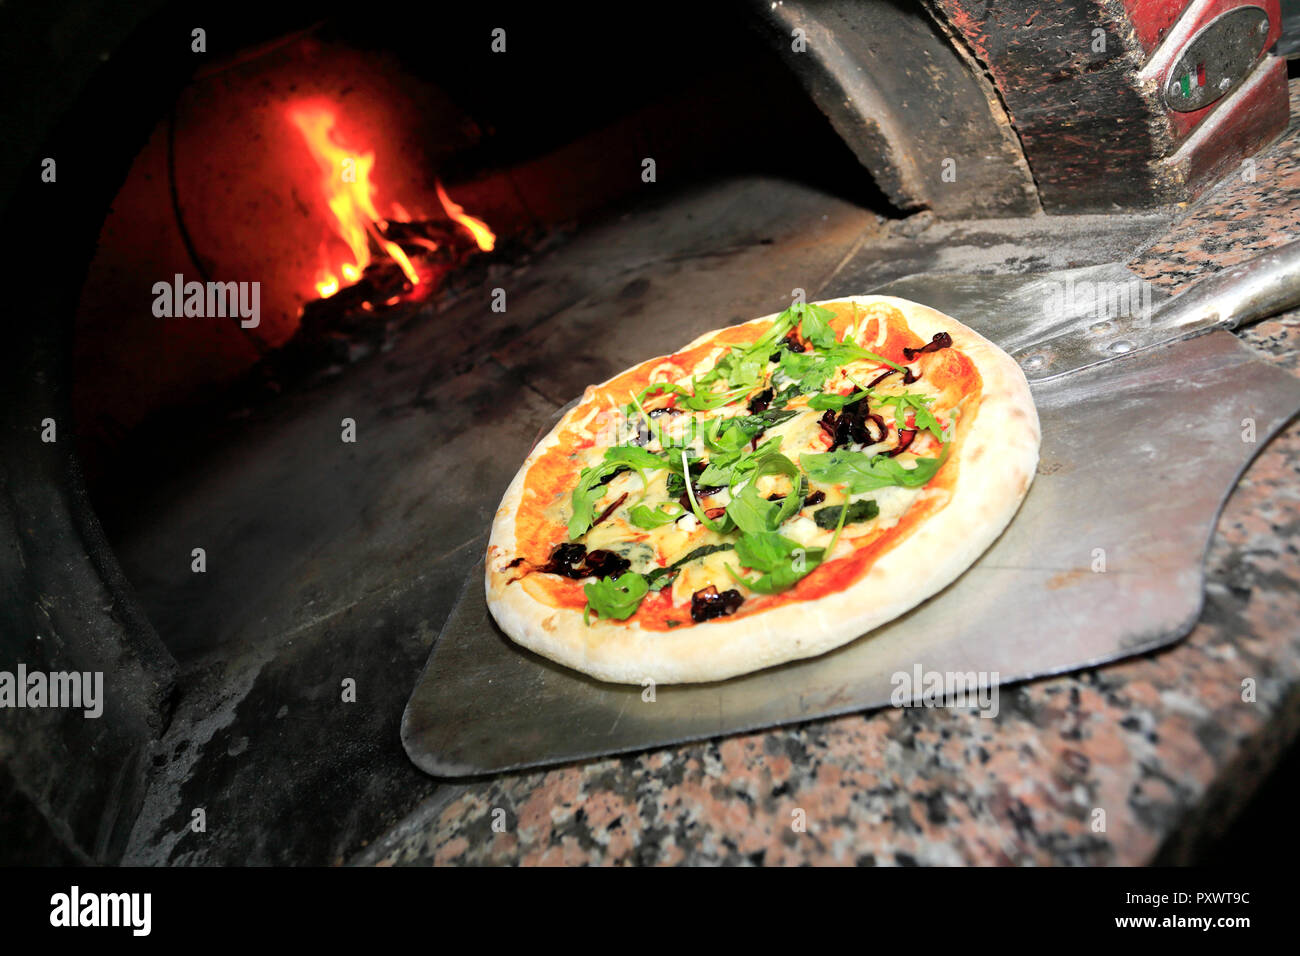 Black Olives, Italian sausage, Ham, fresh Rocket & parmesan shavings Pizza, cooked in a traditional wood fired pizza oven Stock Photo